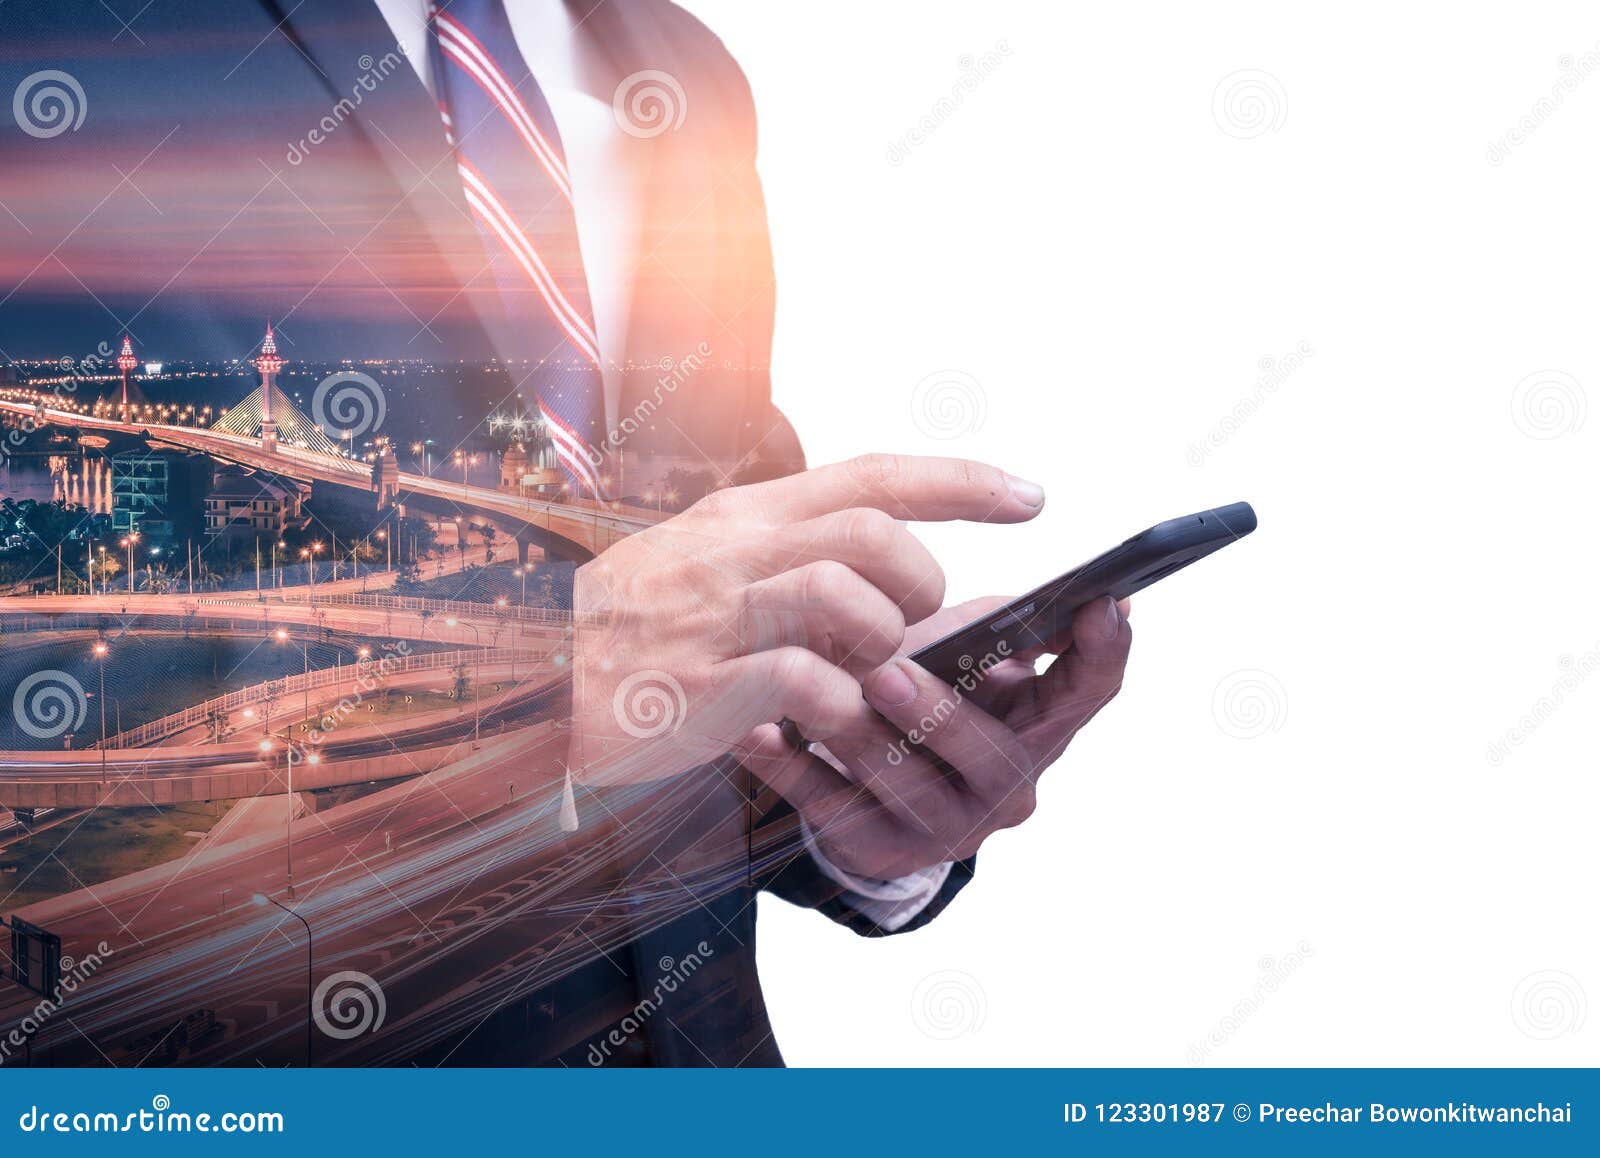 the double exposure image of the businessman using a smartphone during sunrise overlay with cityscape image. the concept of modern